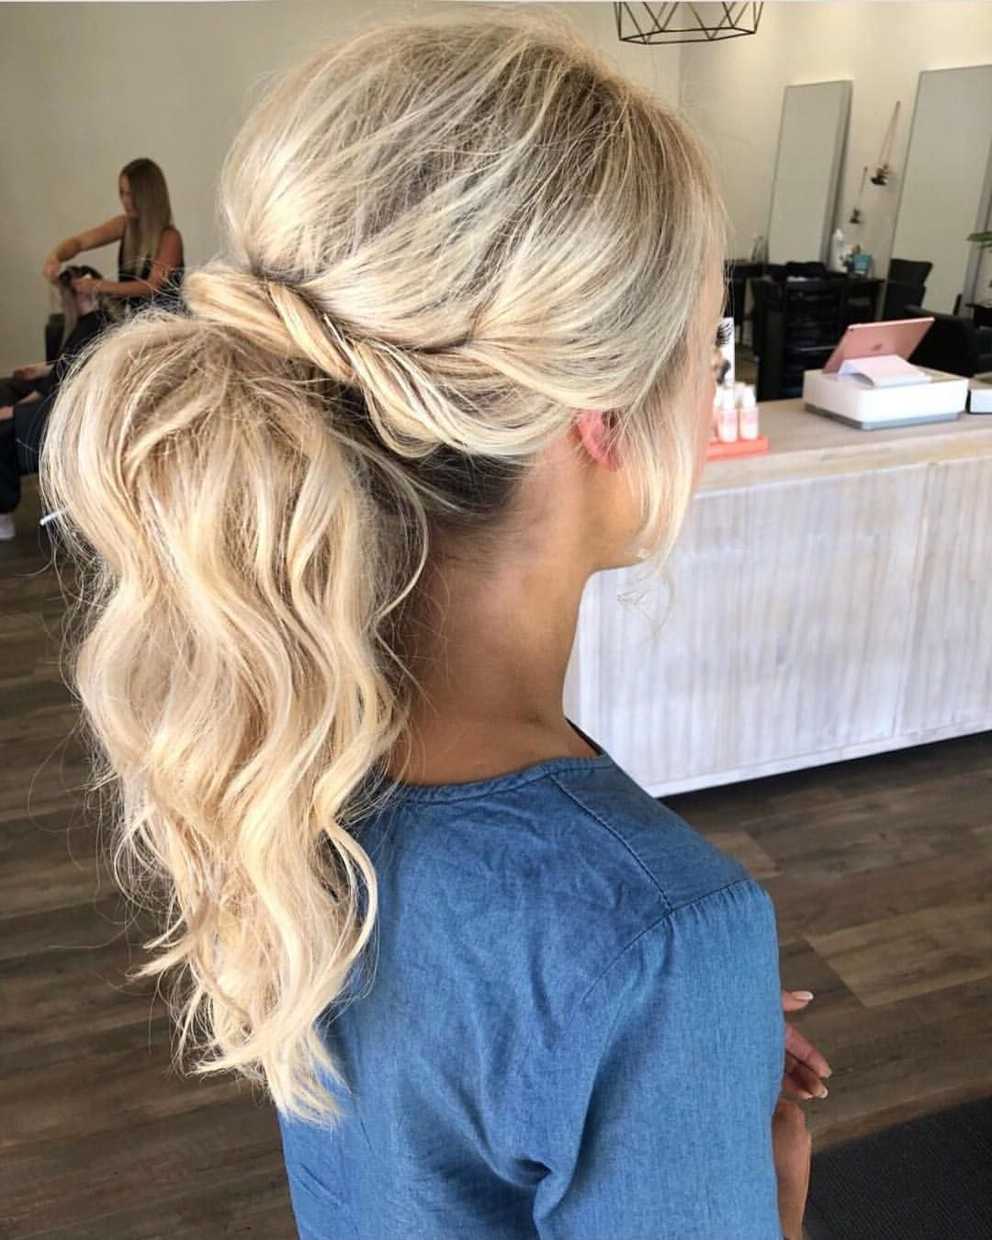 Best And Newest Halo Ponytail Hairstyles Intended For Ponytail Swag Using The Medium Halo In Beige Blonde #613 ⚡️ Hair (Gallery 1 of 20)